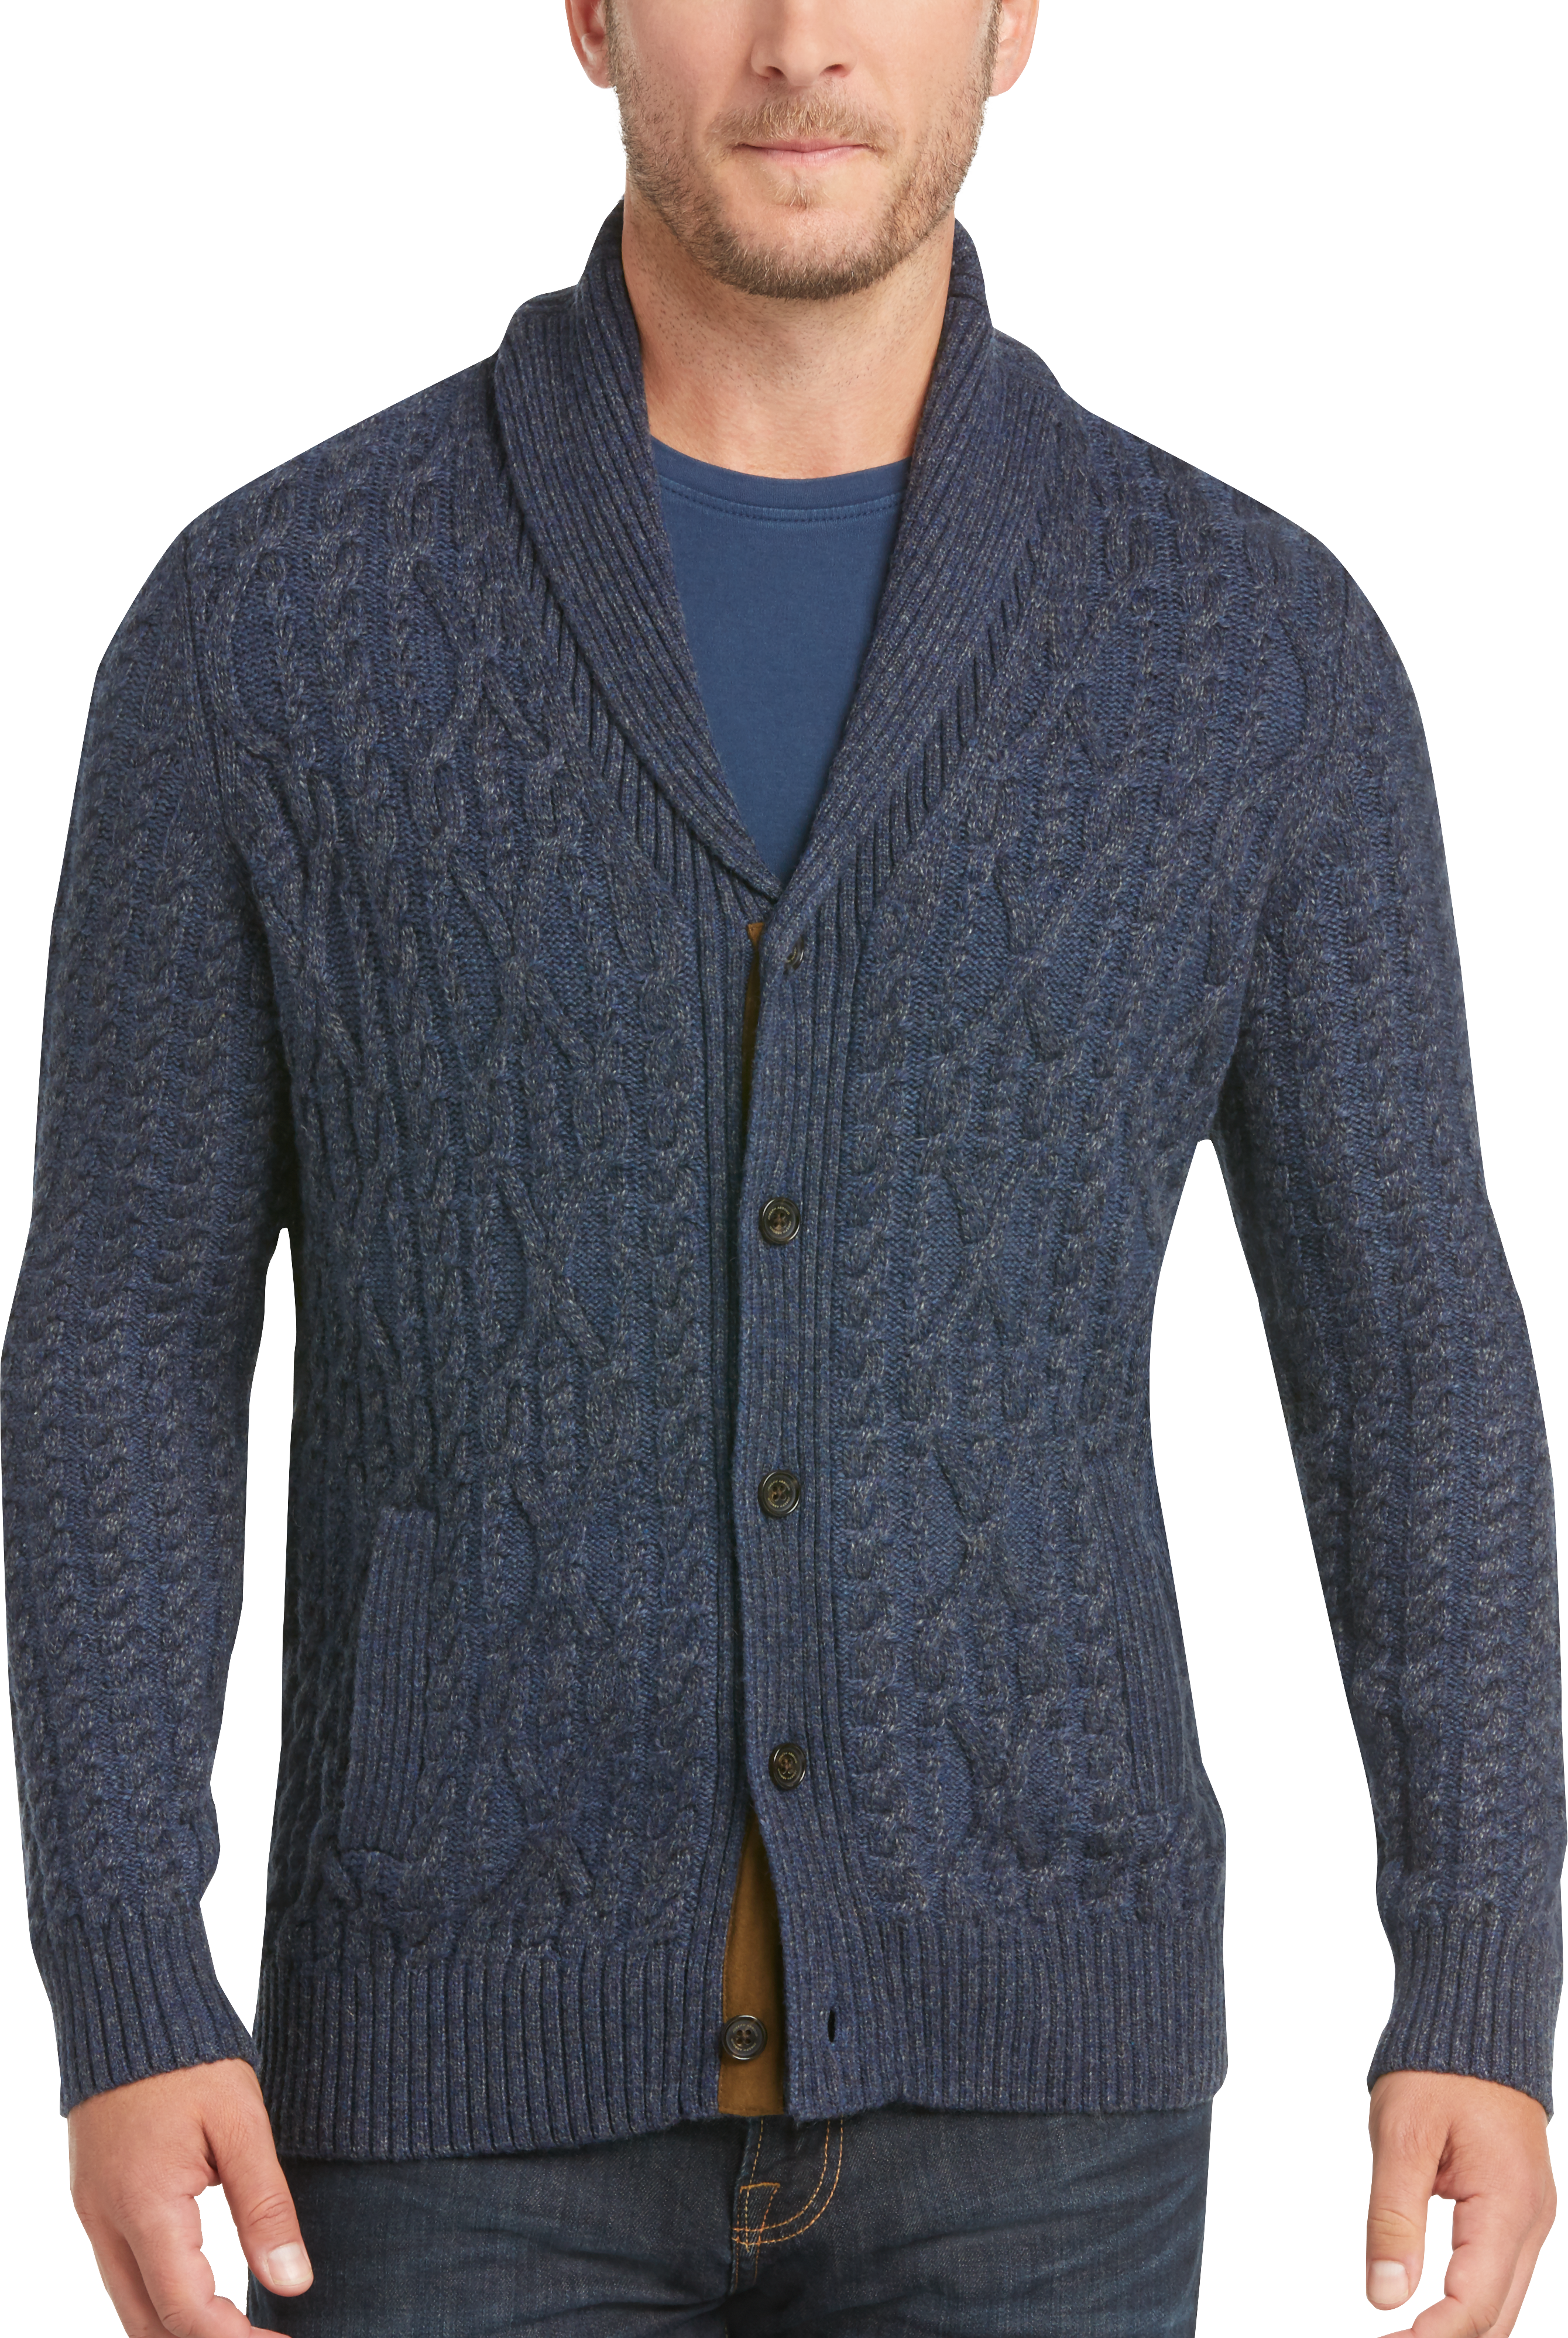 Royal blue cardigan for men clothing line – Sweaters For Men: Buy